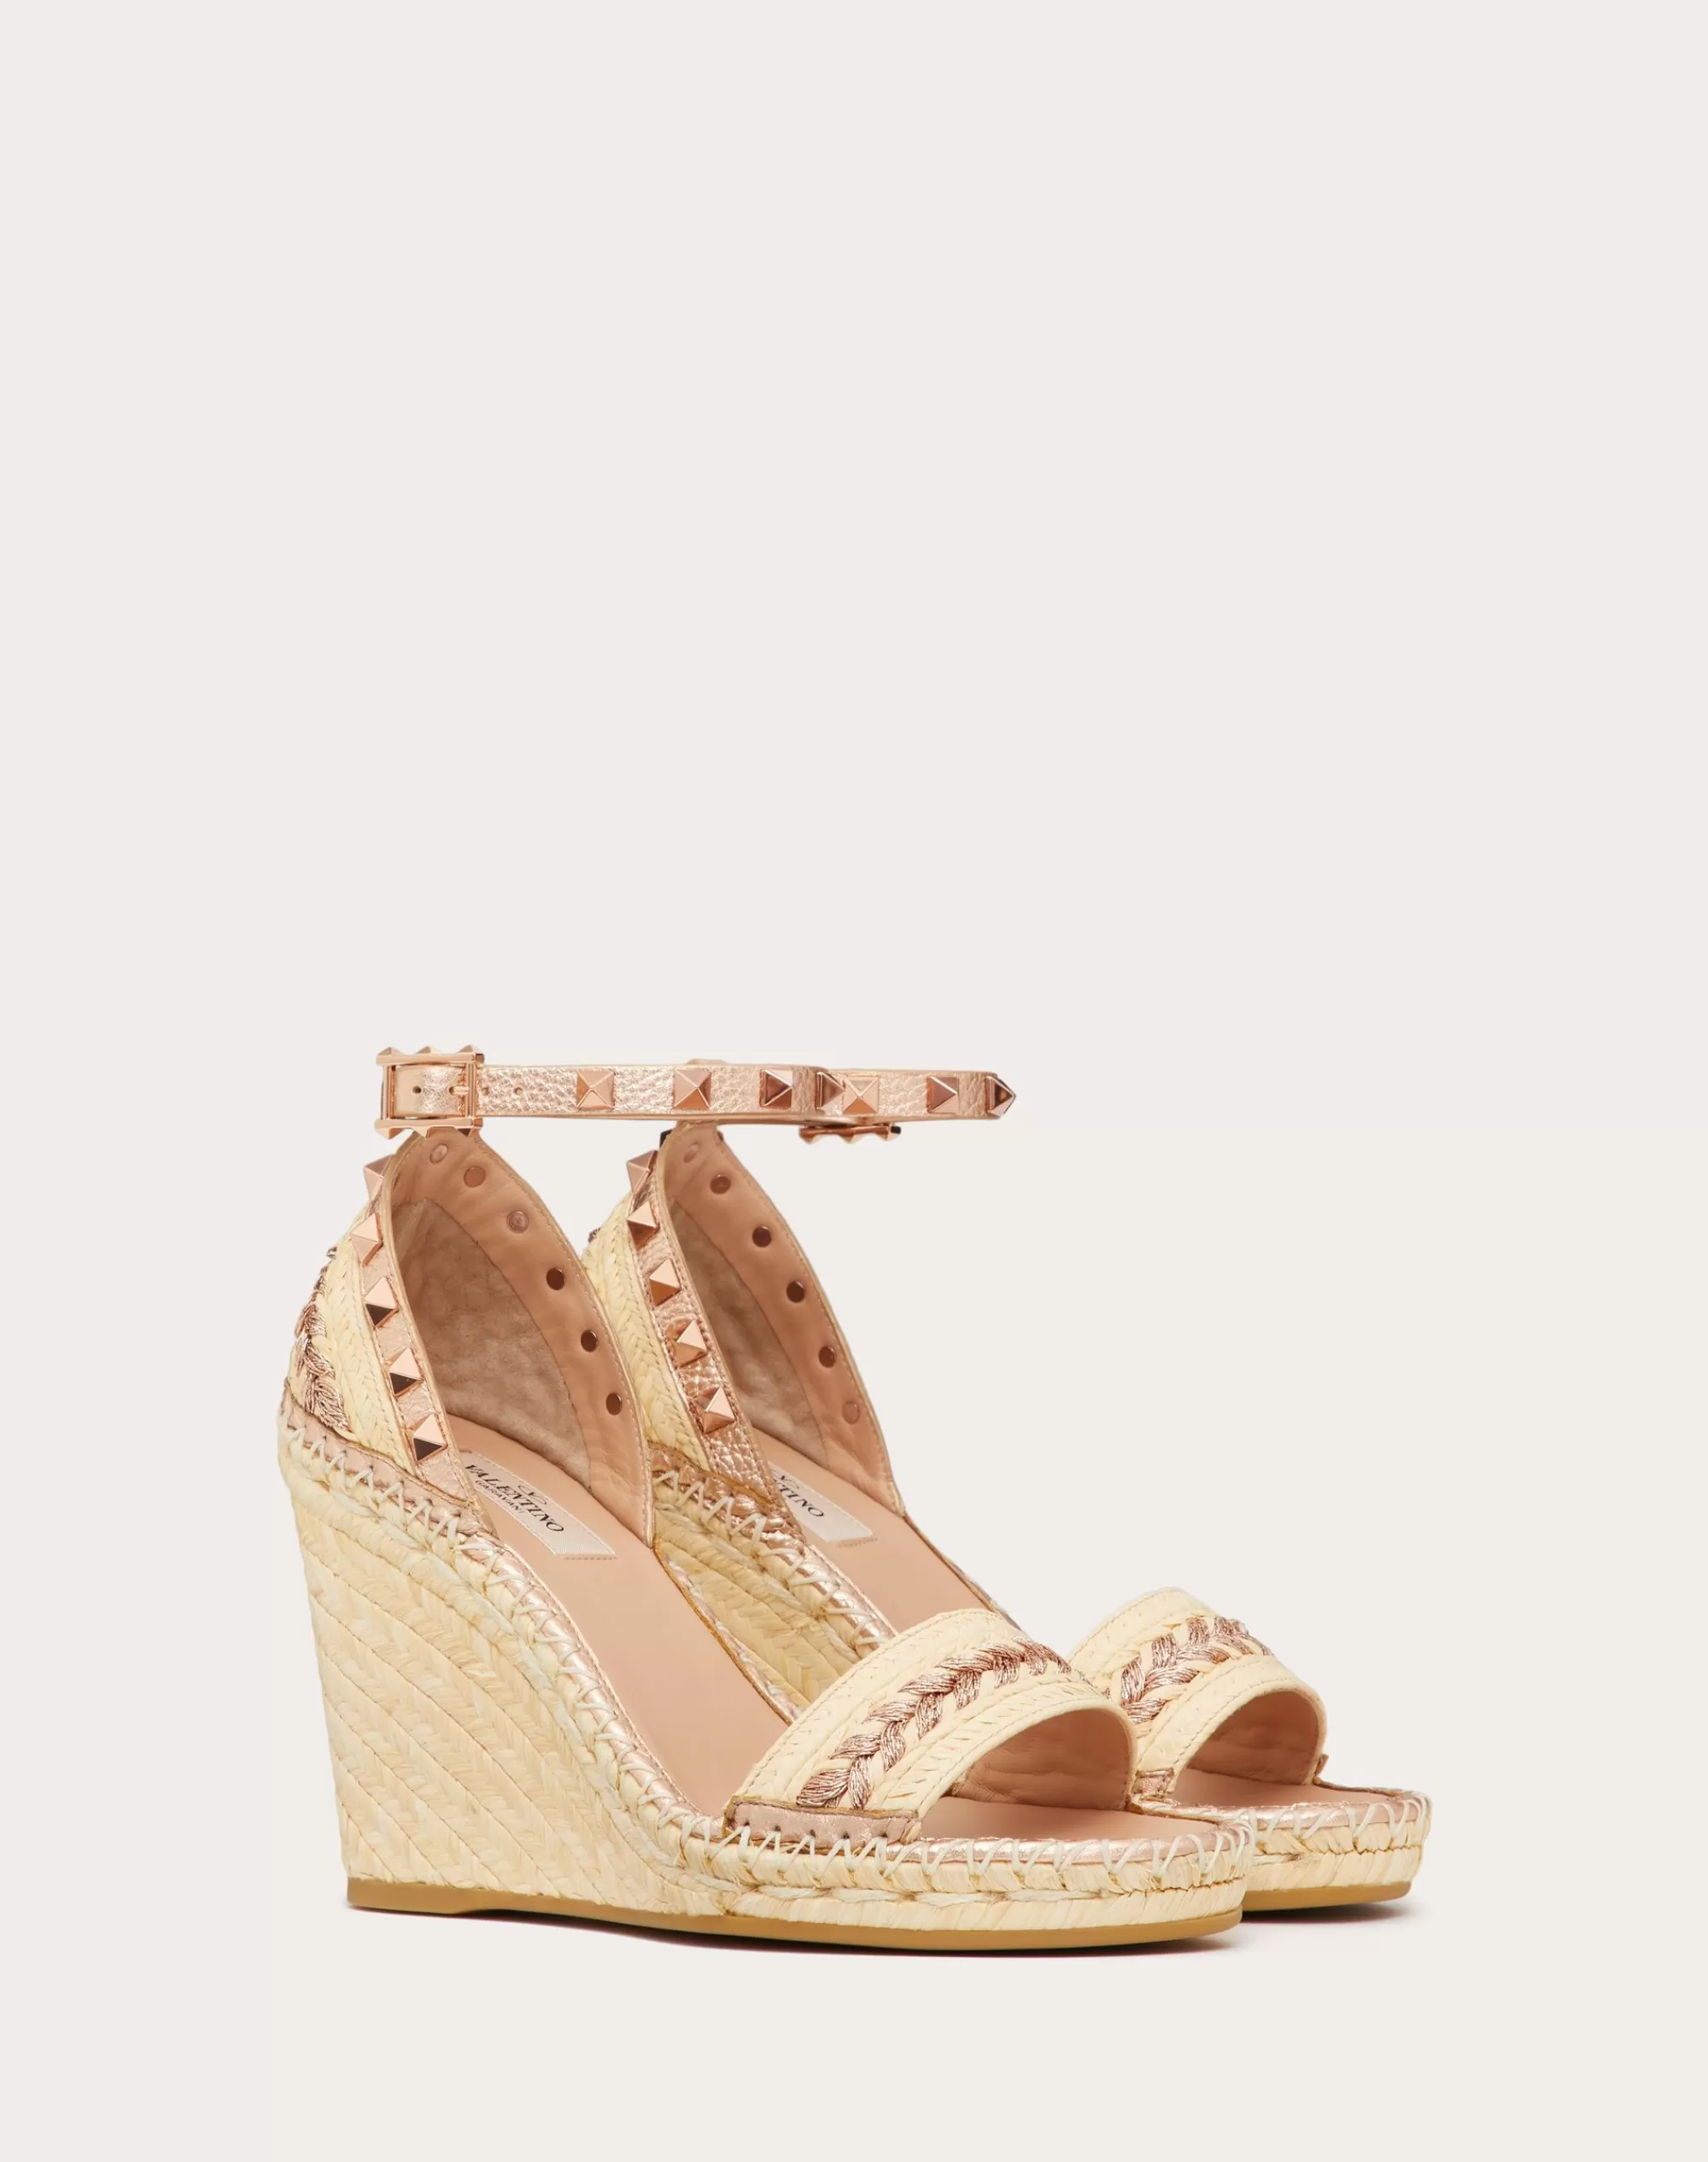 Valentino ROCKSTUD DOUBLE RAFFIA WEDGE SANDAL WITH TONE-ON-TONE STUDS 105MM Natural/copper Store